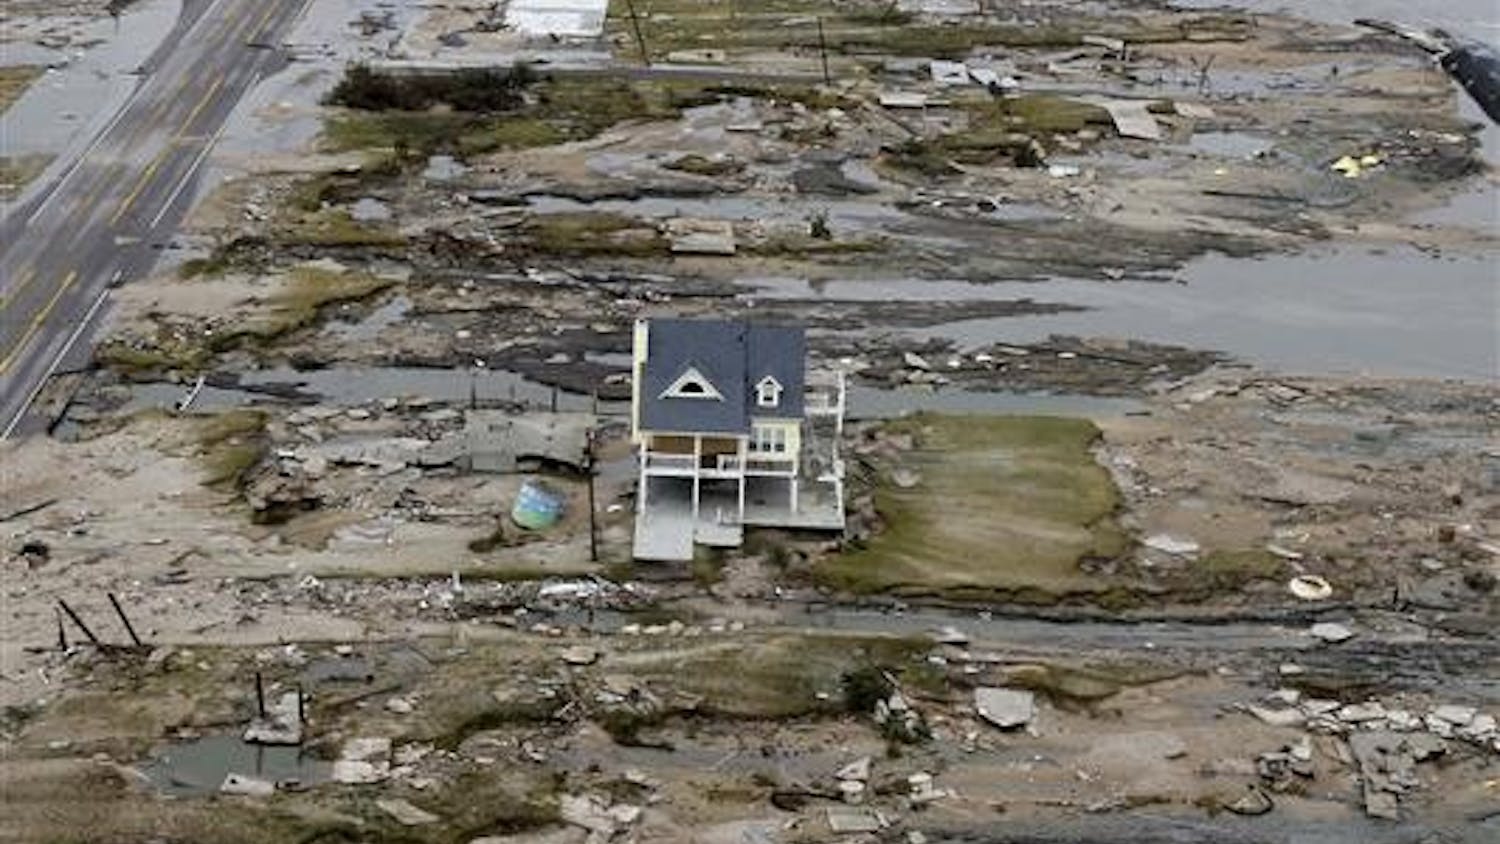 With the Gulf of Mexico seen at right, a beachfront home stands among the debris on Sunday after Hurricane Ike hit the area in Gilchrist, Texas. Ike was the first major storm to directly hit a major U.S. metro area since Hurricane Katrina devastated New Orleans in 2005.